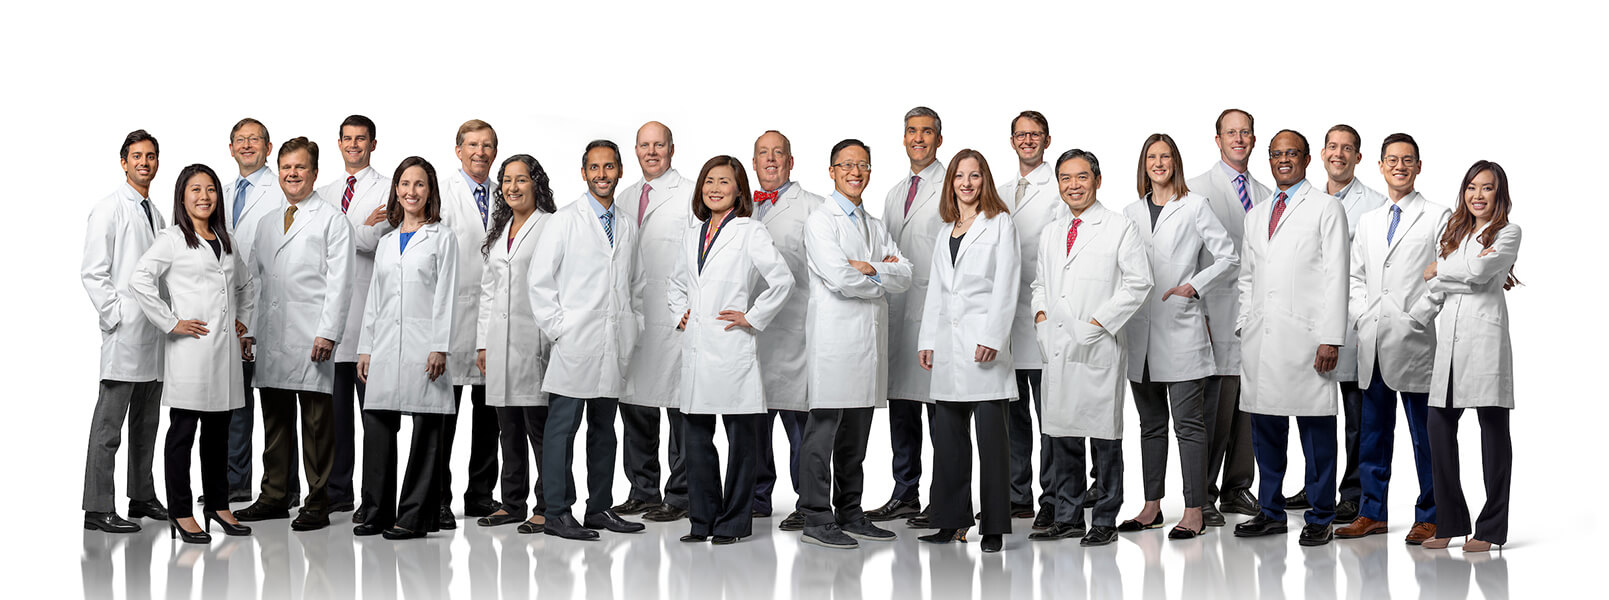 RCTX physicians group image